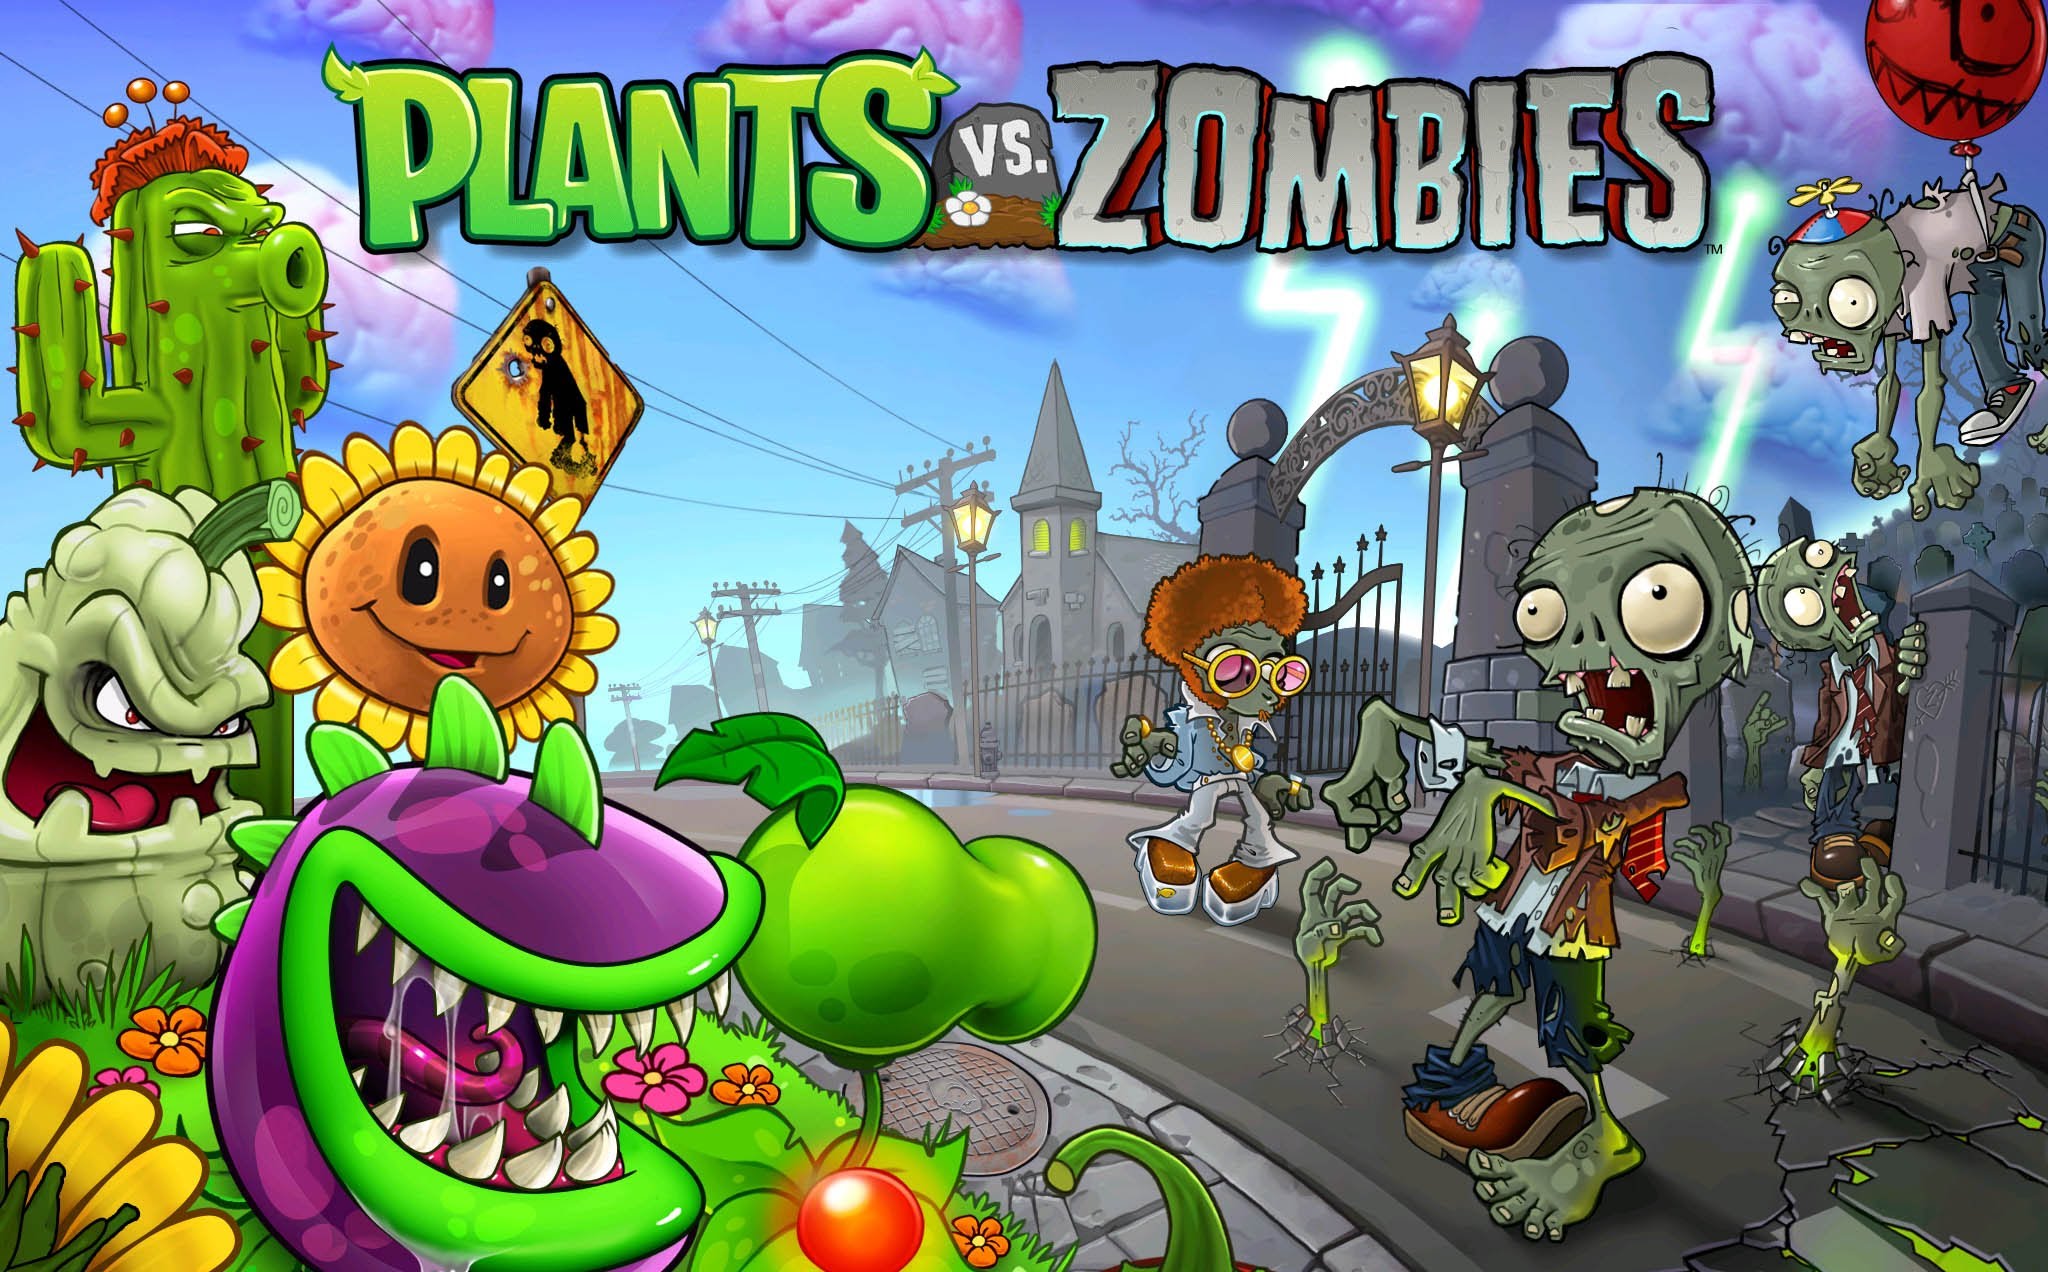 Pvz free download pc canon pixma mg5520 installation software download